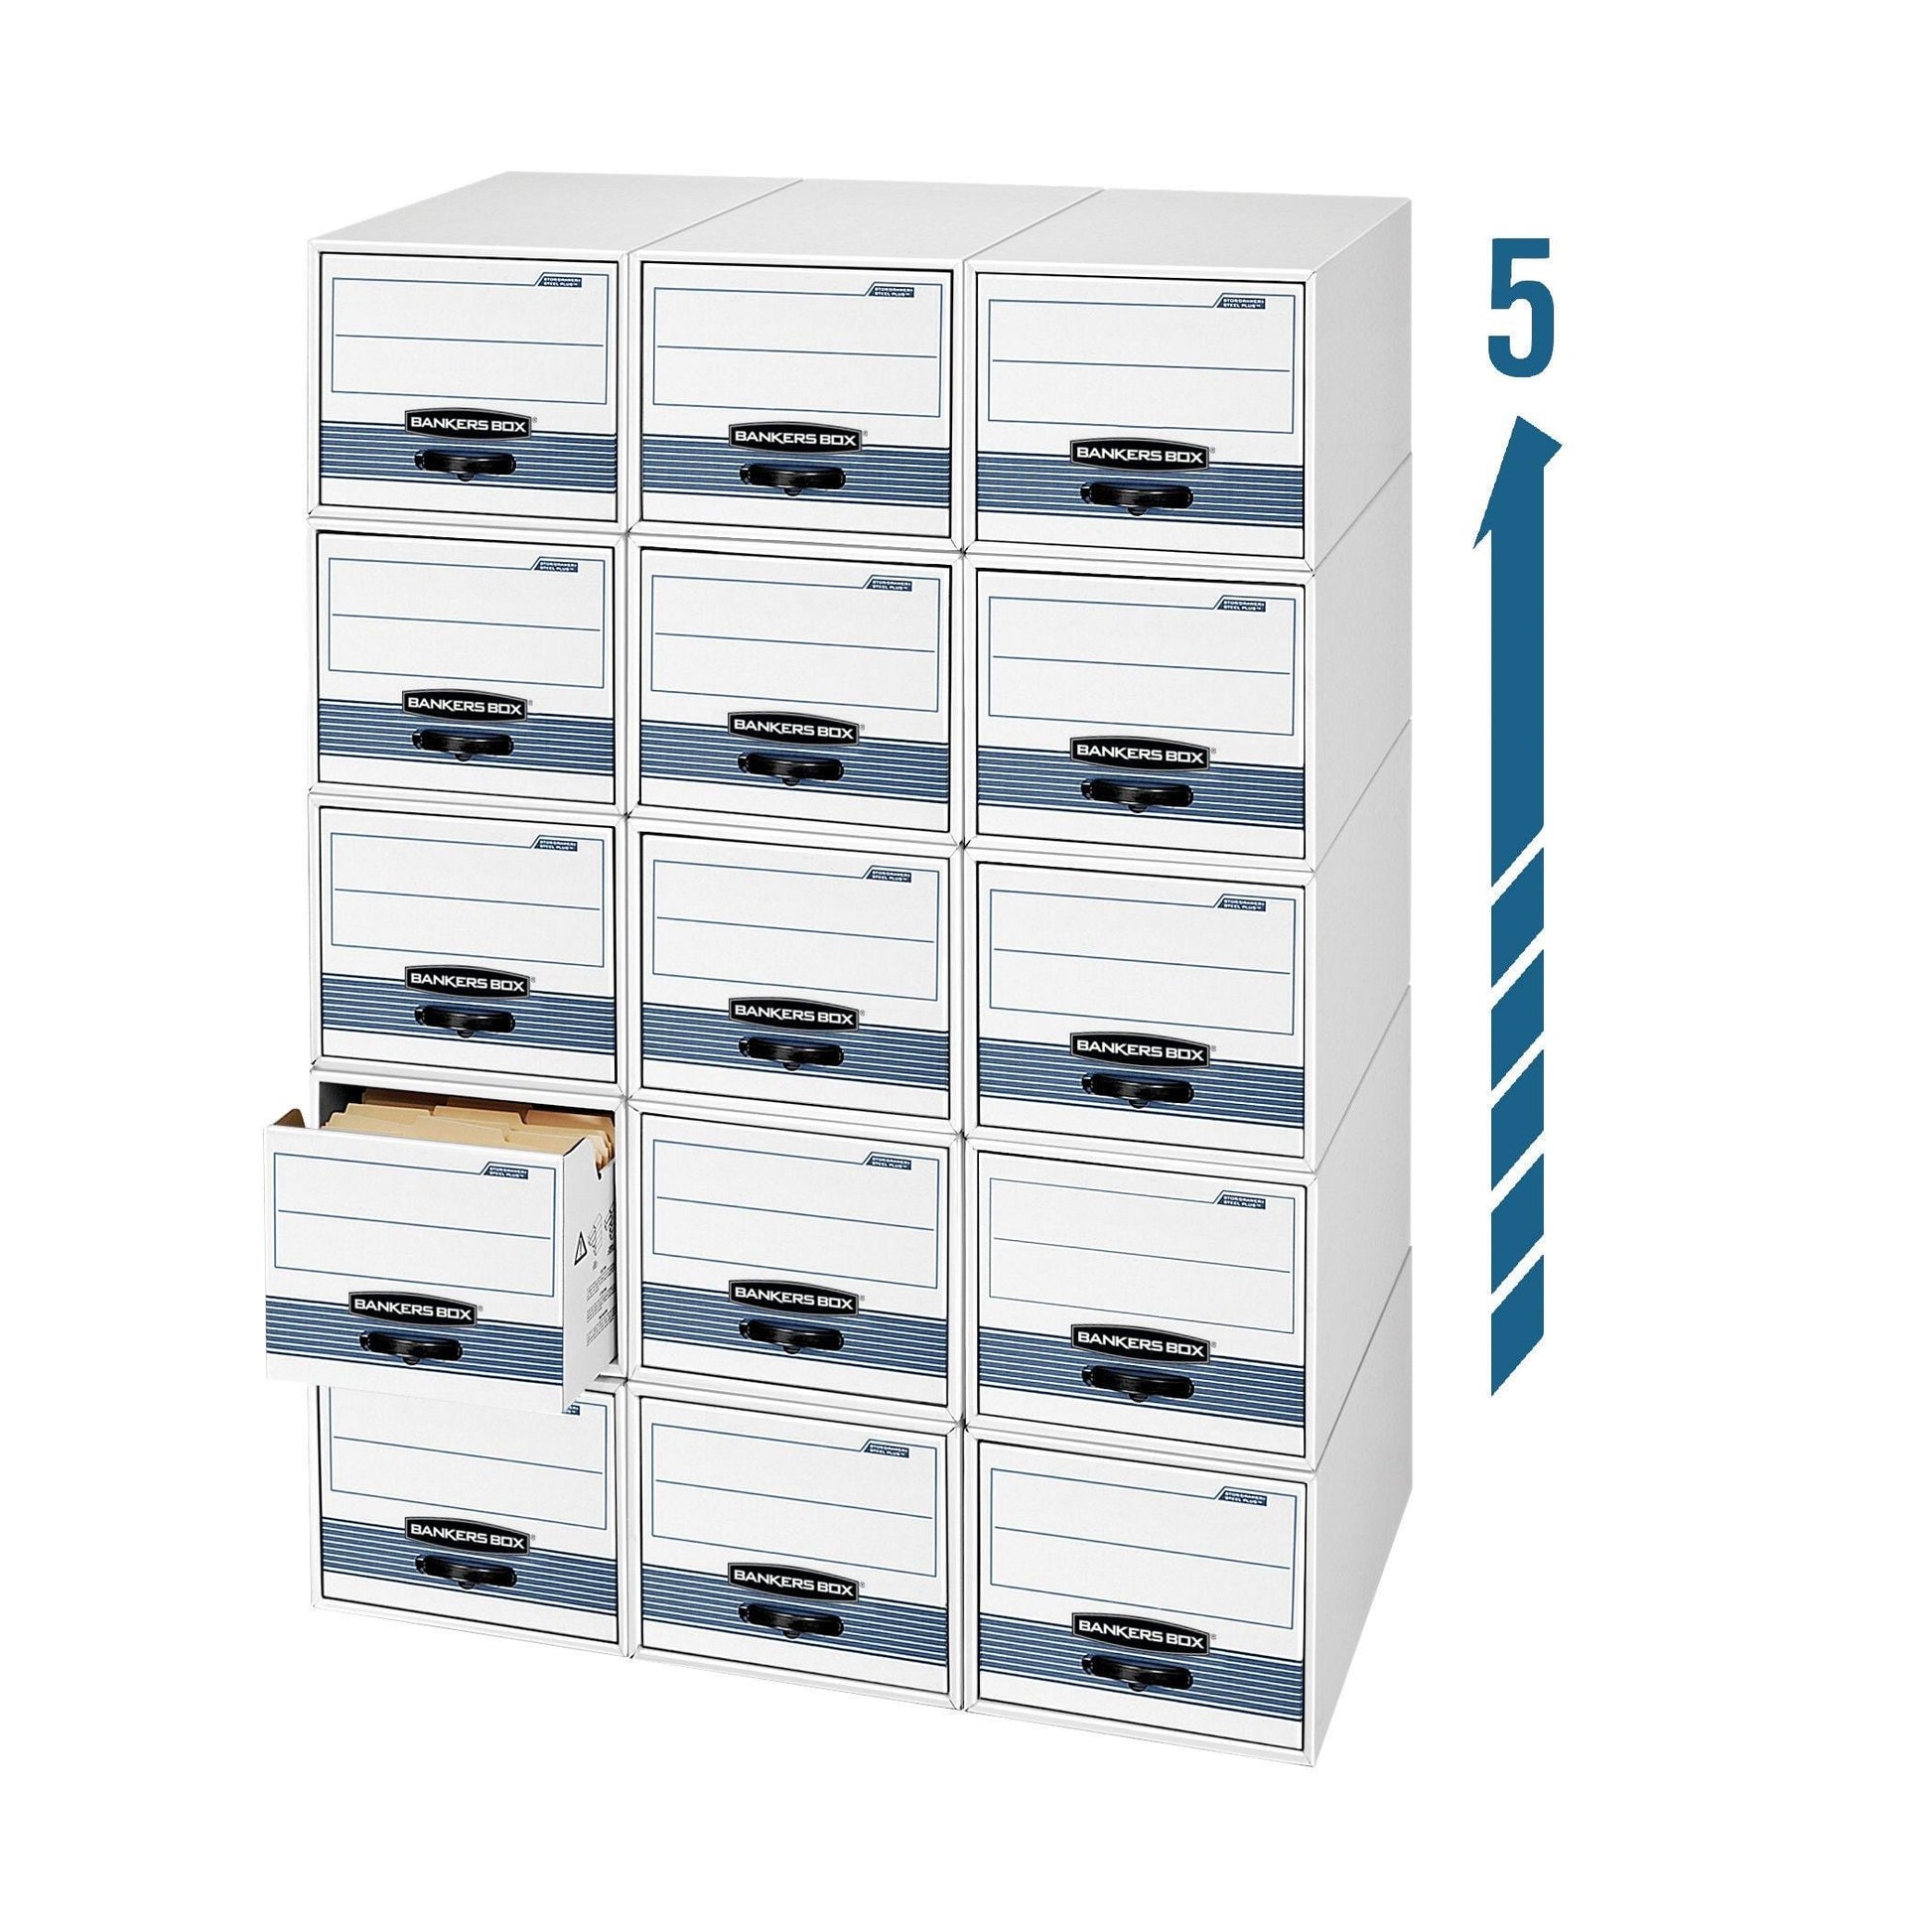 Storage bankers box stor drawer steel plus extra space saving filing cabinet stacks up to 5 high legal 6 pack 00312